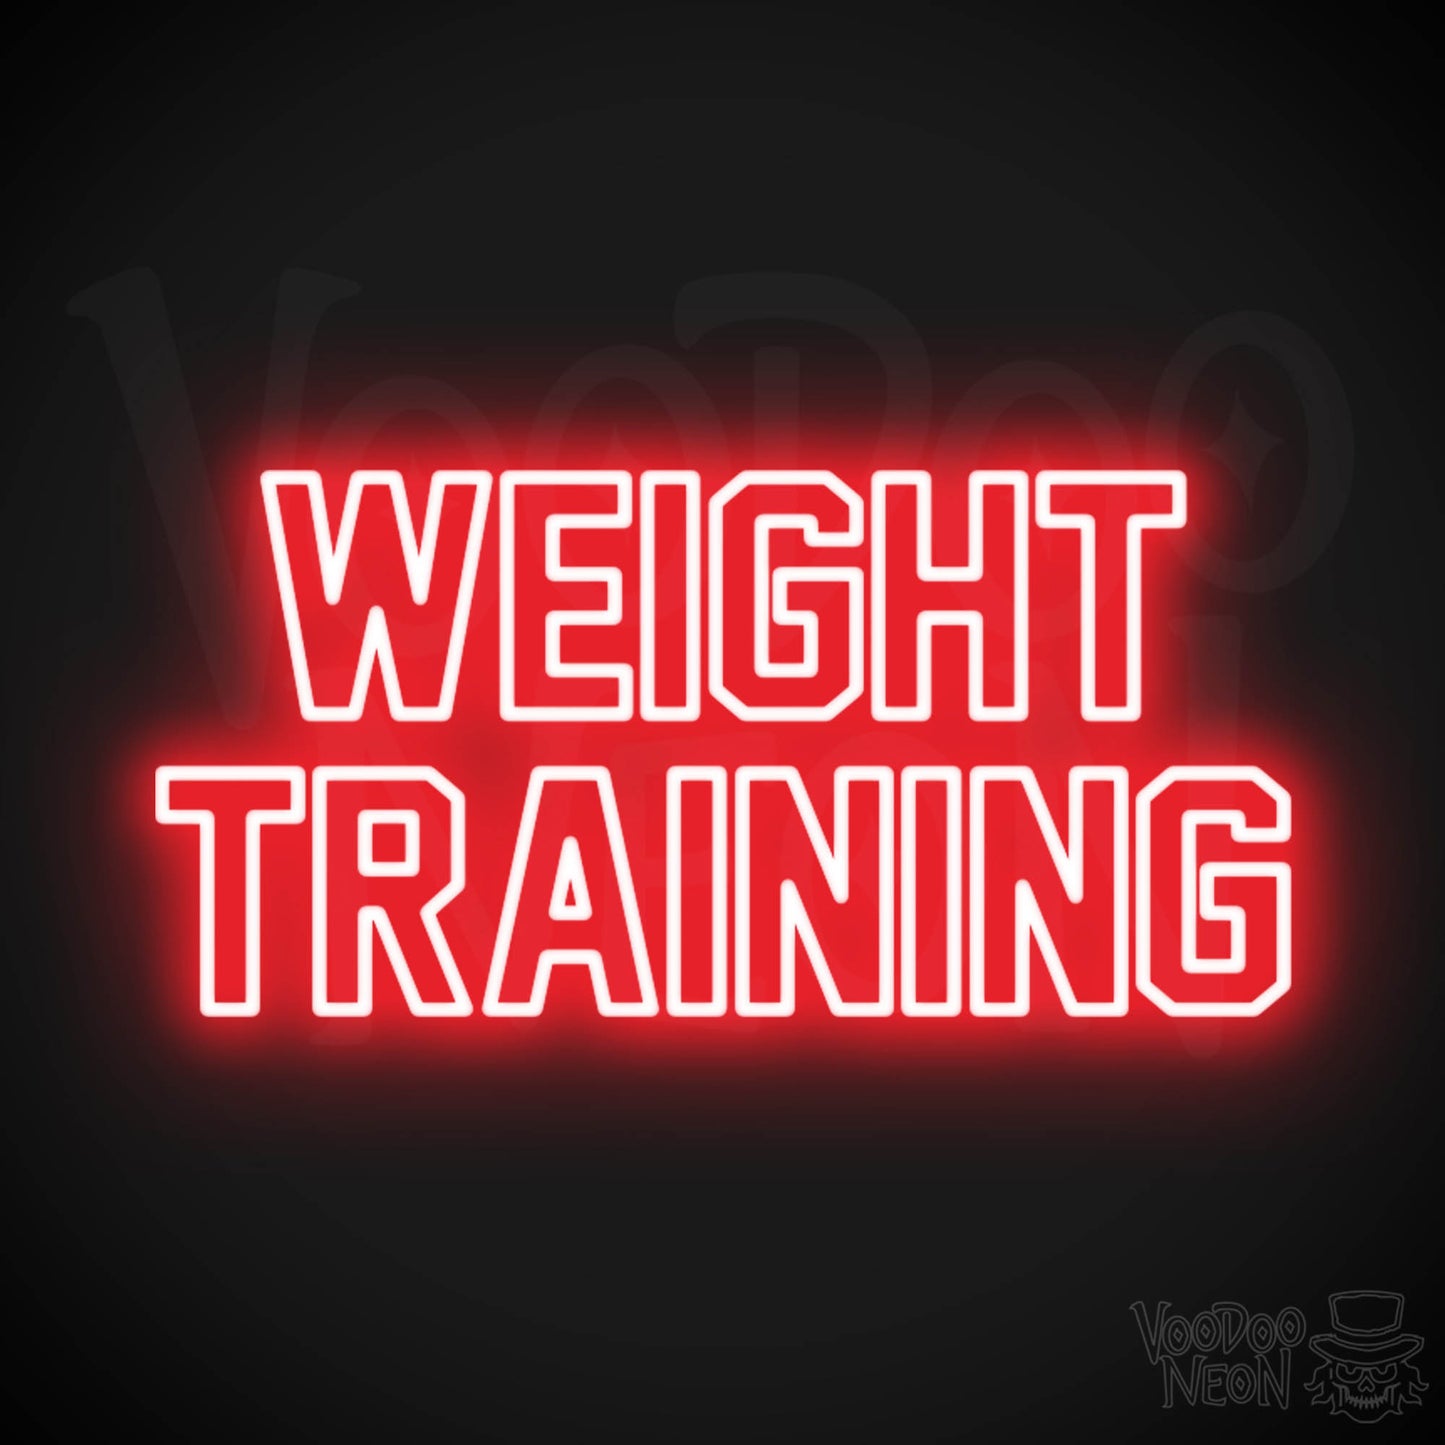 Weight Training LED Neon - Red